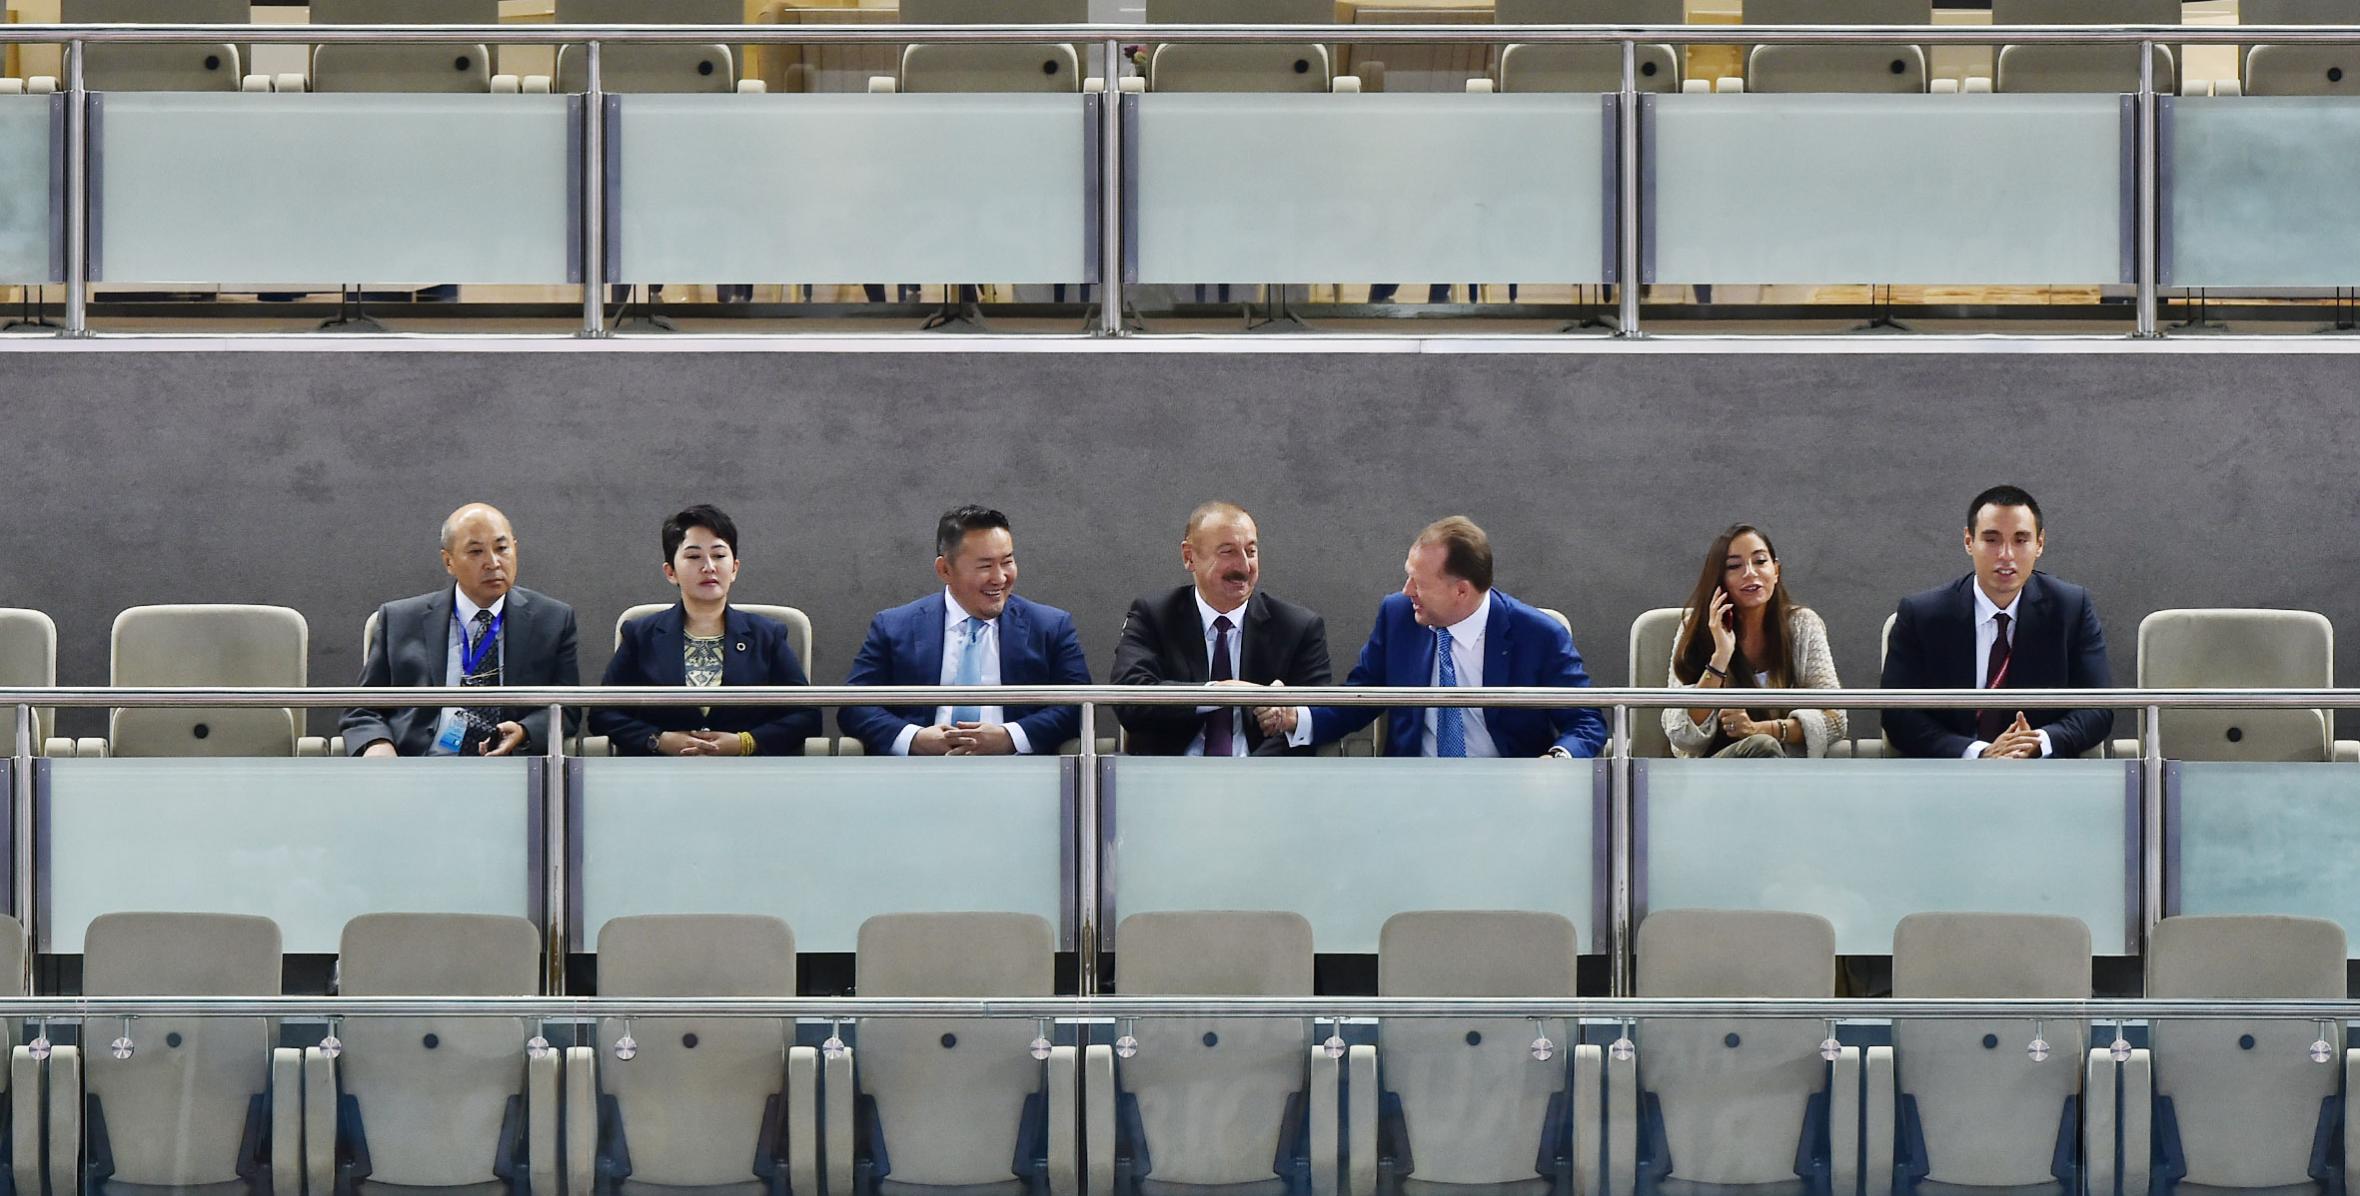 Ilham Aliyev watched final bout at National Gymnastics Arena